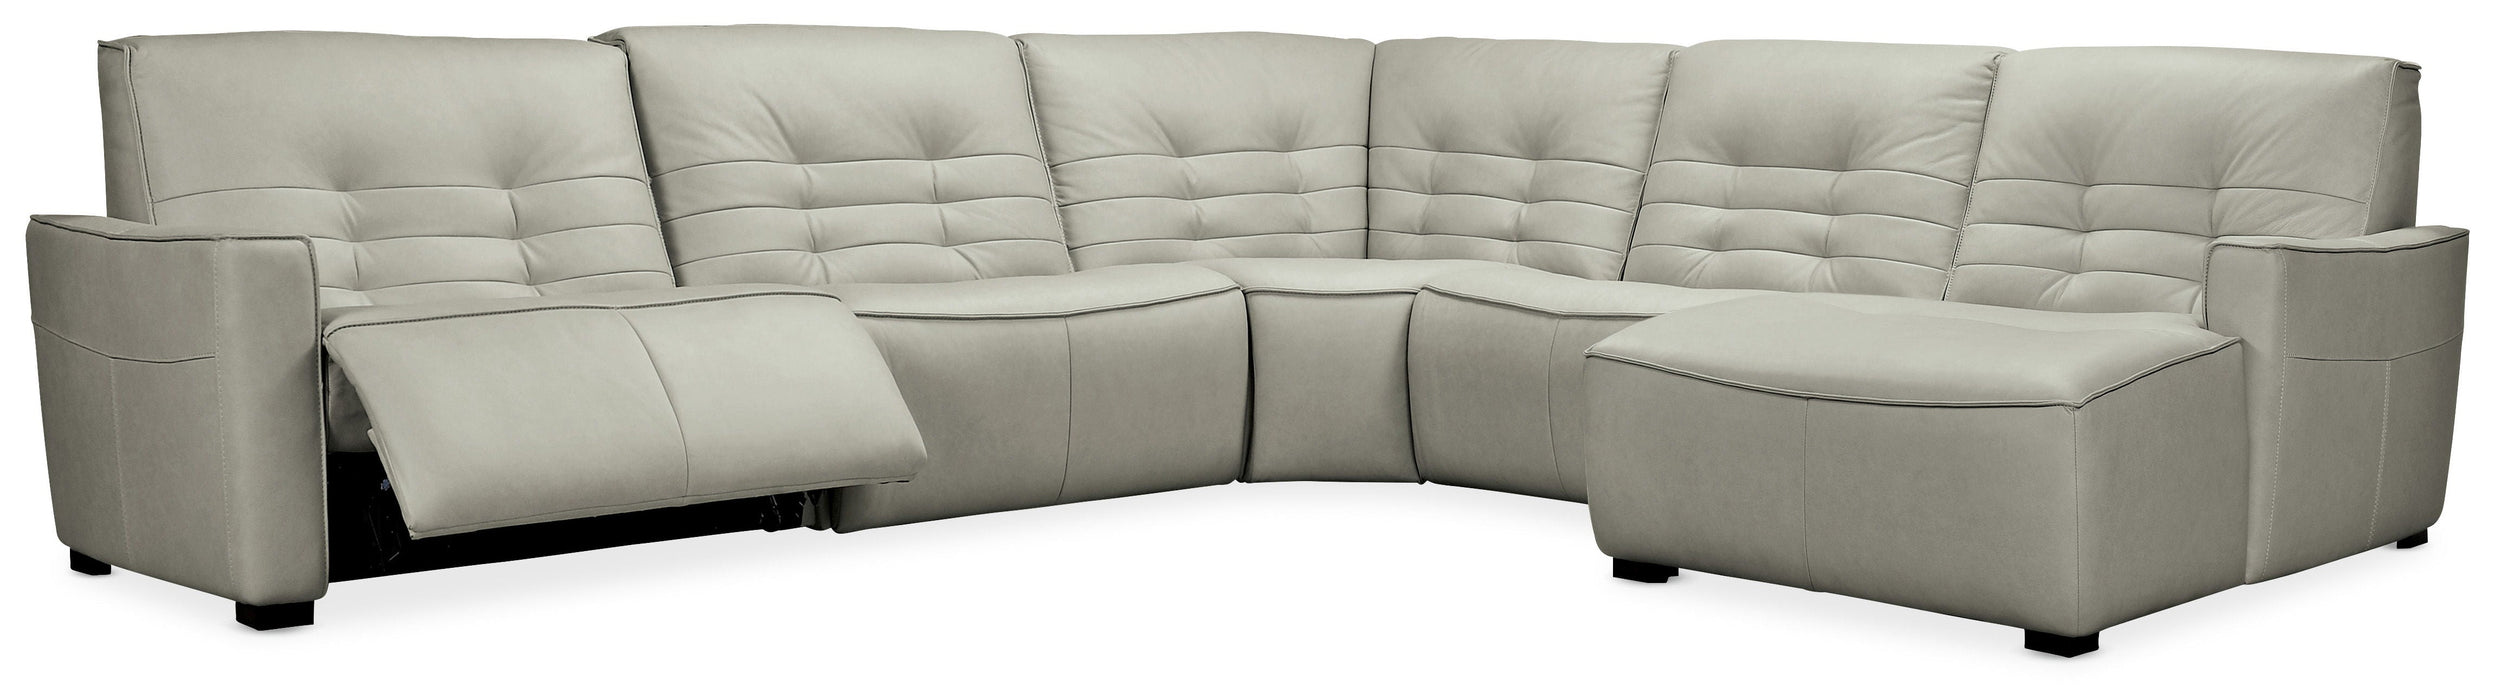 Reaux 5-Piece RAF Chaise Sectional With 2 Power Recliners